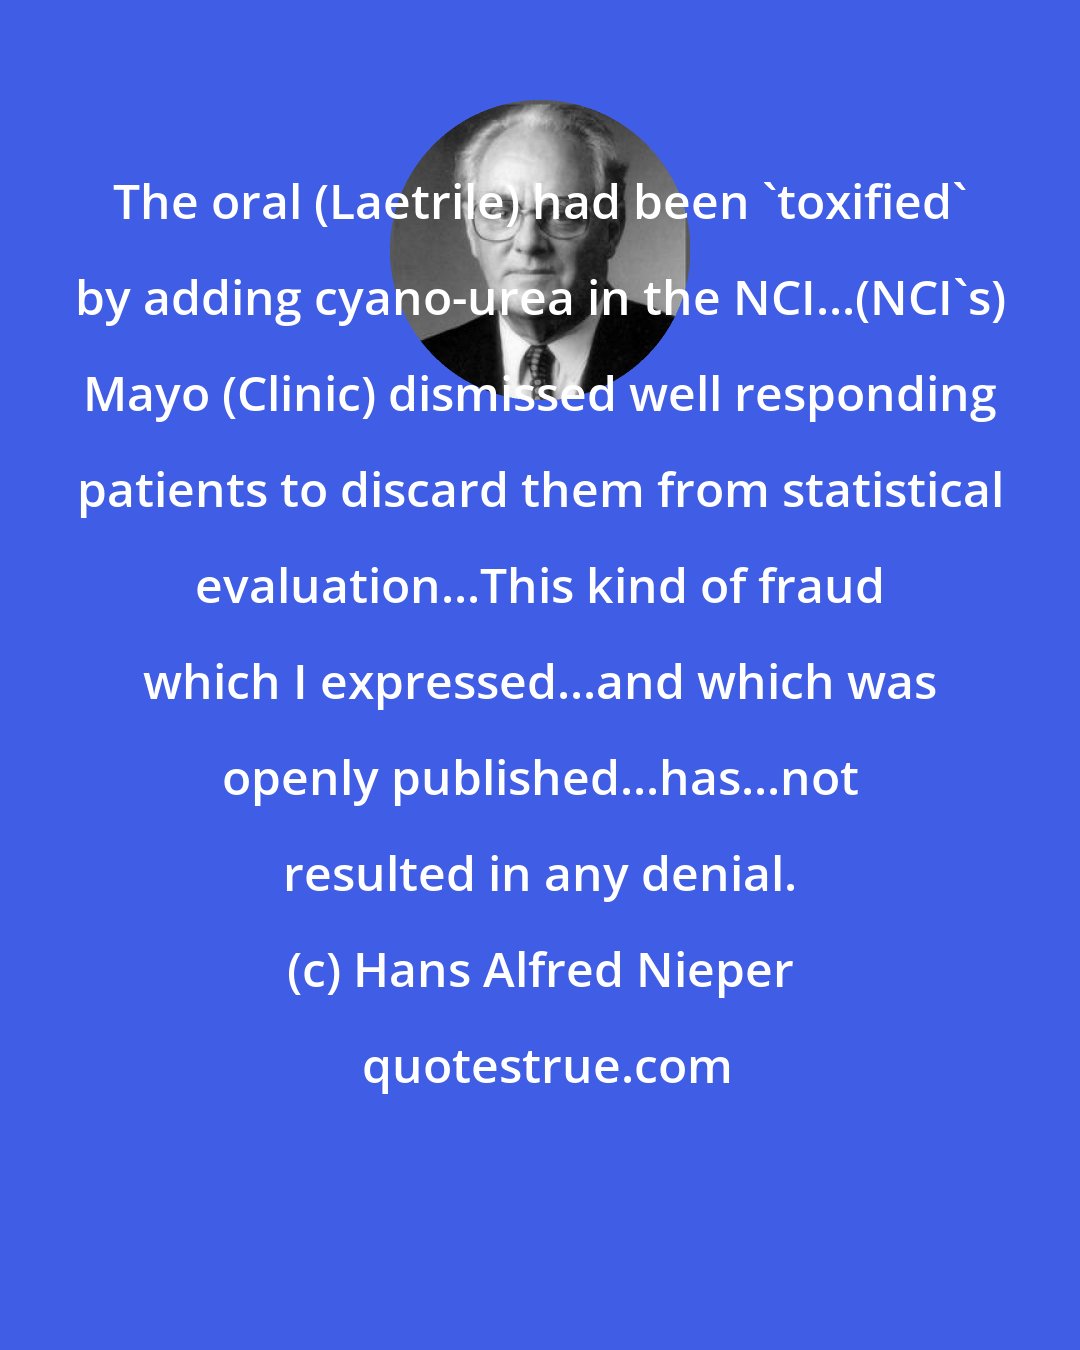 Hans Alfred Nieper: The oral (Laetrile) had been 'toxified' by adding cyano-urea in the NCI...(NCI's) Mayo (Clinic) dismissed well responding patients to discard them from statistical evaluation...This kind of fraud which I expressed...and which was openly published...has...not resulted in any denial.